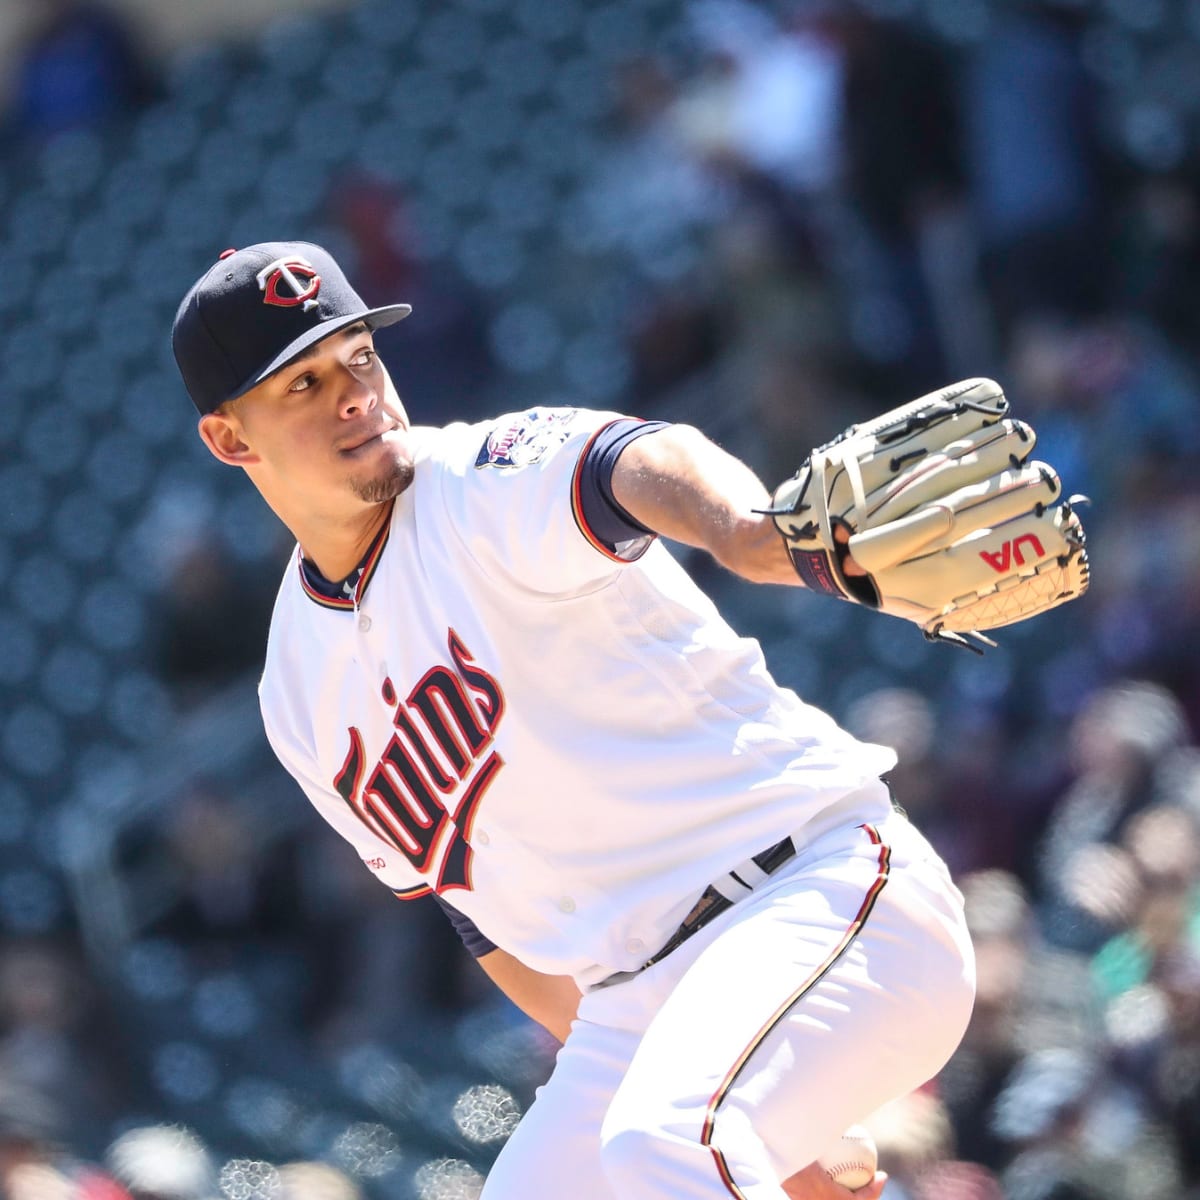 What to expect tonight from All-Star Jose Berrios - Twinkie Town